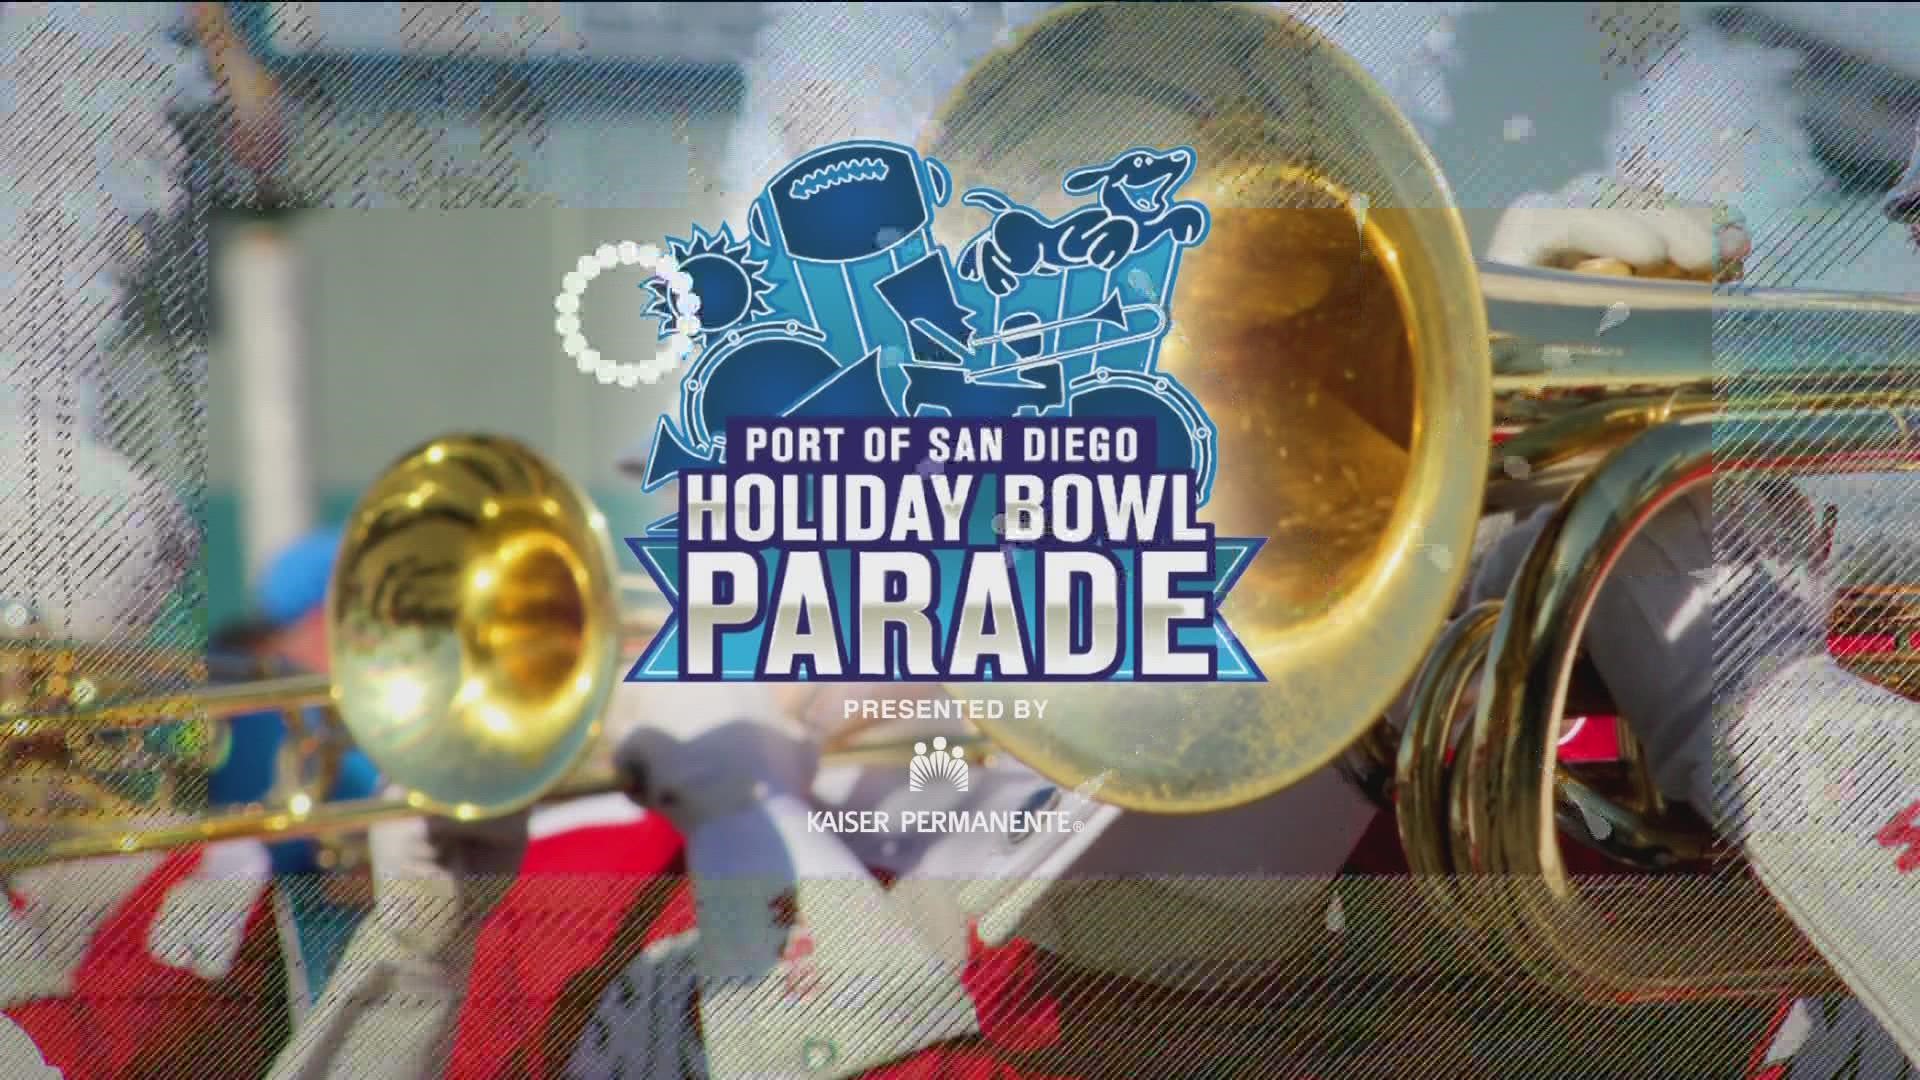 Previewing the Port of San Diego Holiday Bowl Parade that will be shown